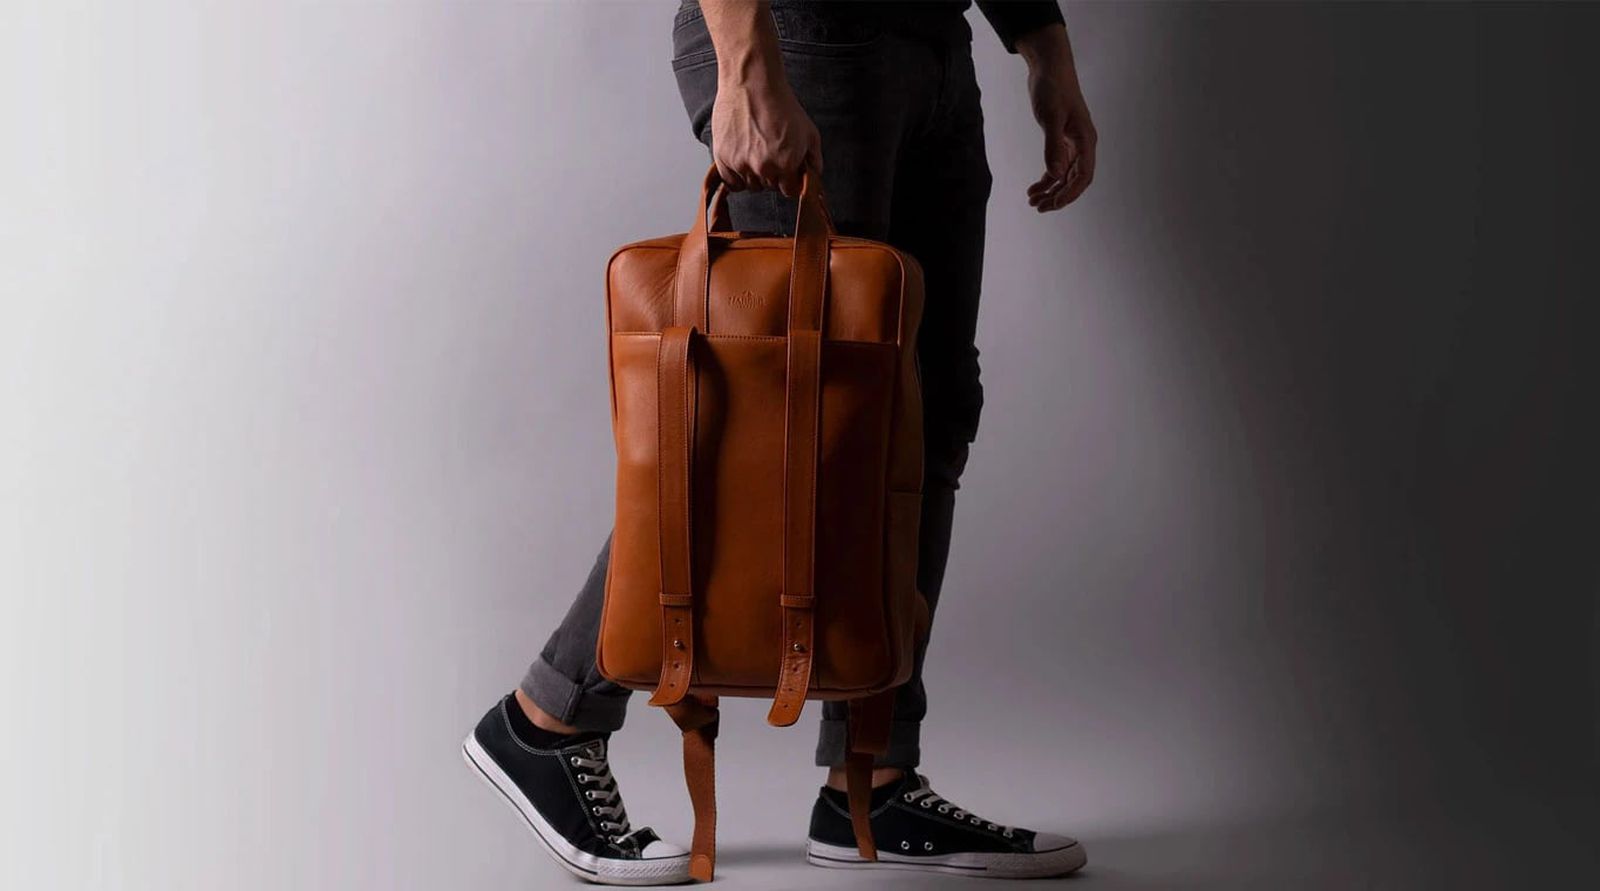 MacRumors Giveaway: Win a Leather City Backpack From Harber London